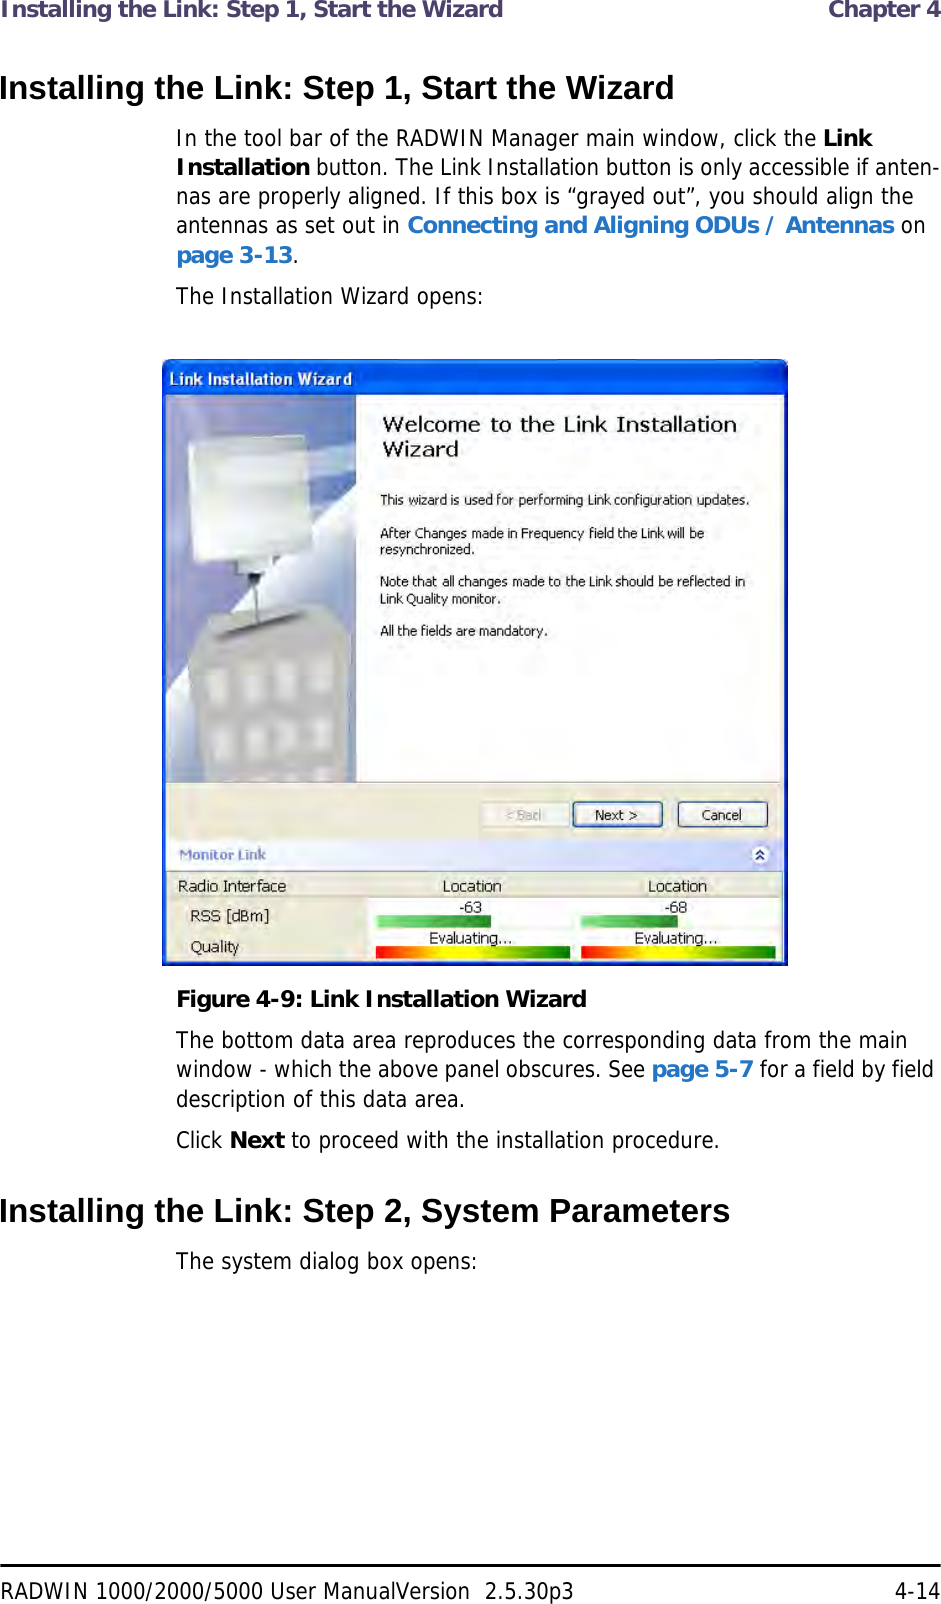 Installing the Link: Step 1, Start the Wizard  Chapter 4RADWIN 1000/2000/5000 User ManualVersion  2.5.30p3 4-14Installing the Link: Step 1, Start the WizardIn the tool bar of the RADWIN Manager main window, click the Link Installation button. The Link Installation button is only accessible if anten-nas are properly aligned. If this box is “grayed out”, you should align the antennas as set out in Connecting and Aligning ODUs / Antennas on page 3-13.The Installation Wizard opens:Figure 4-9: Link Installation WizardThe bottom data area reproduces the corresponding data from the main window - which the above panel obscures. See page 5-7 for a field by field description of this data area.Click Next to proceed with the installation procedure.Installing the Link: Step 2, System ParametersThe system dialog box opens: